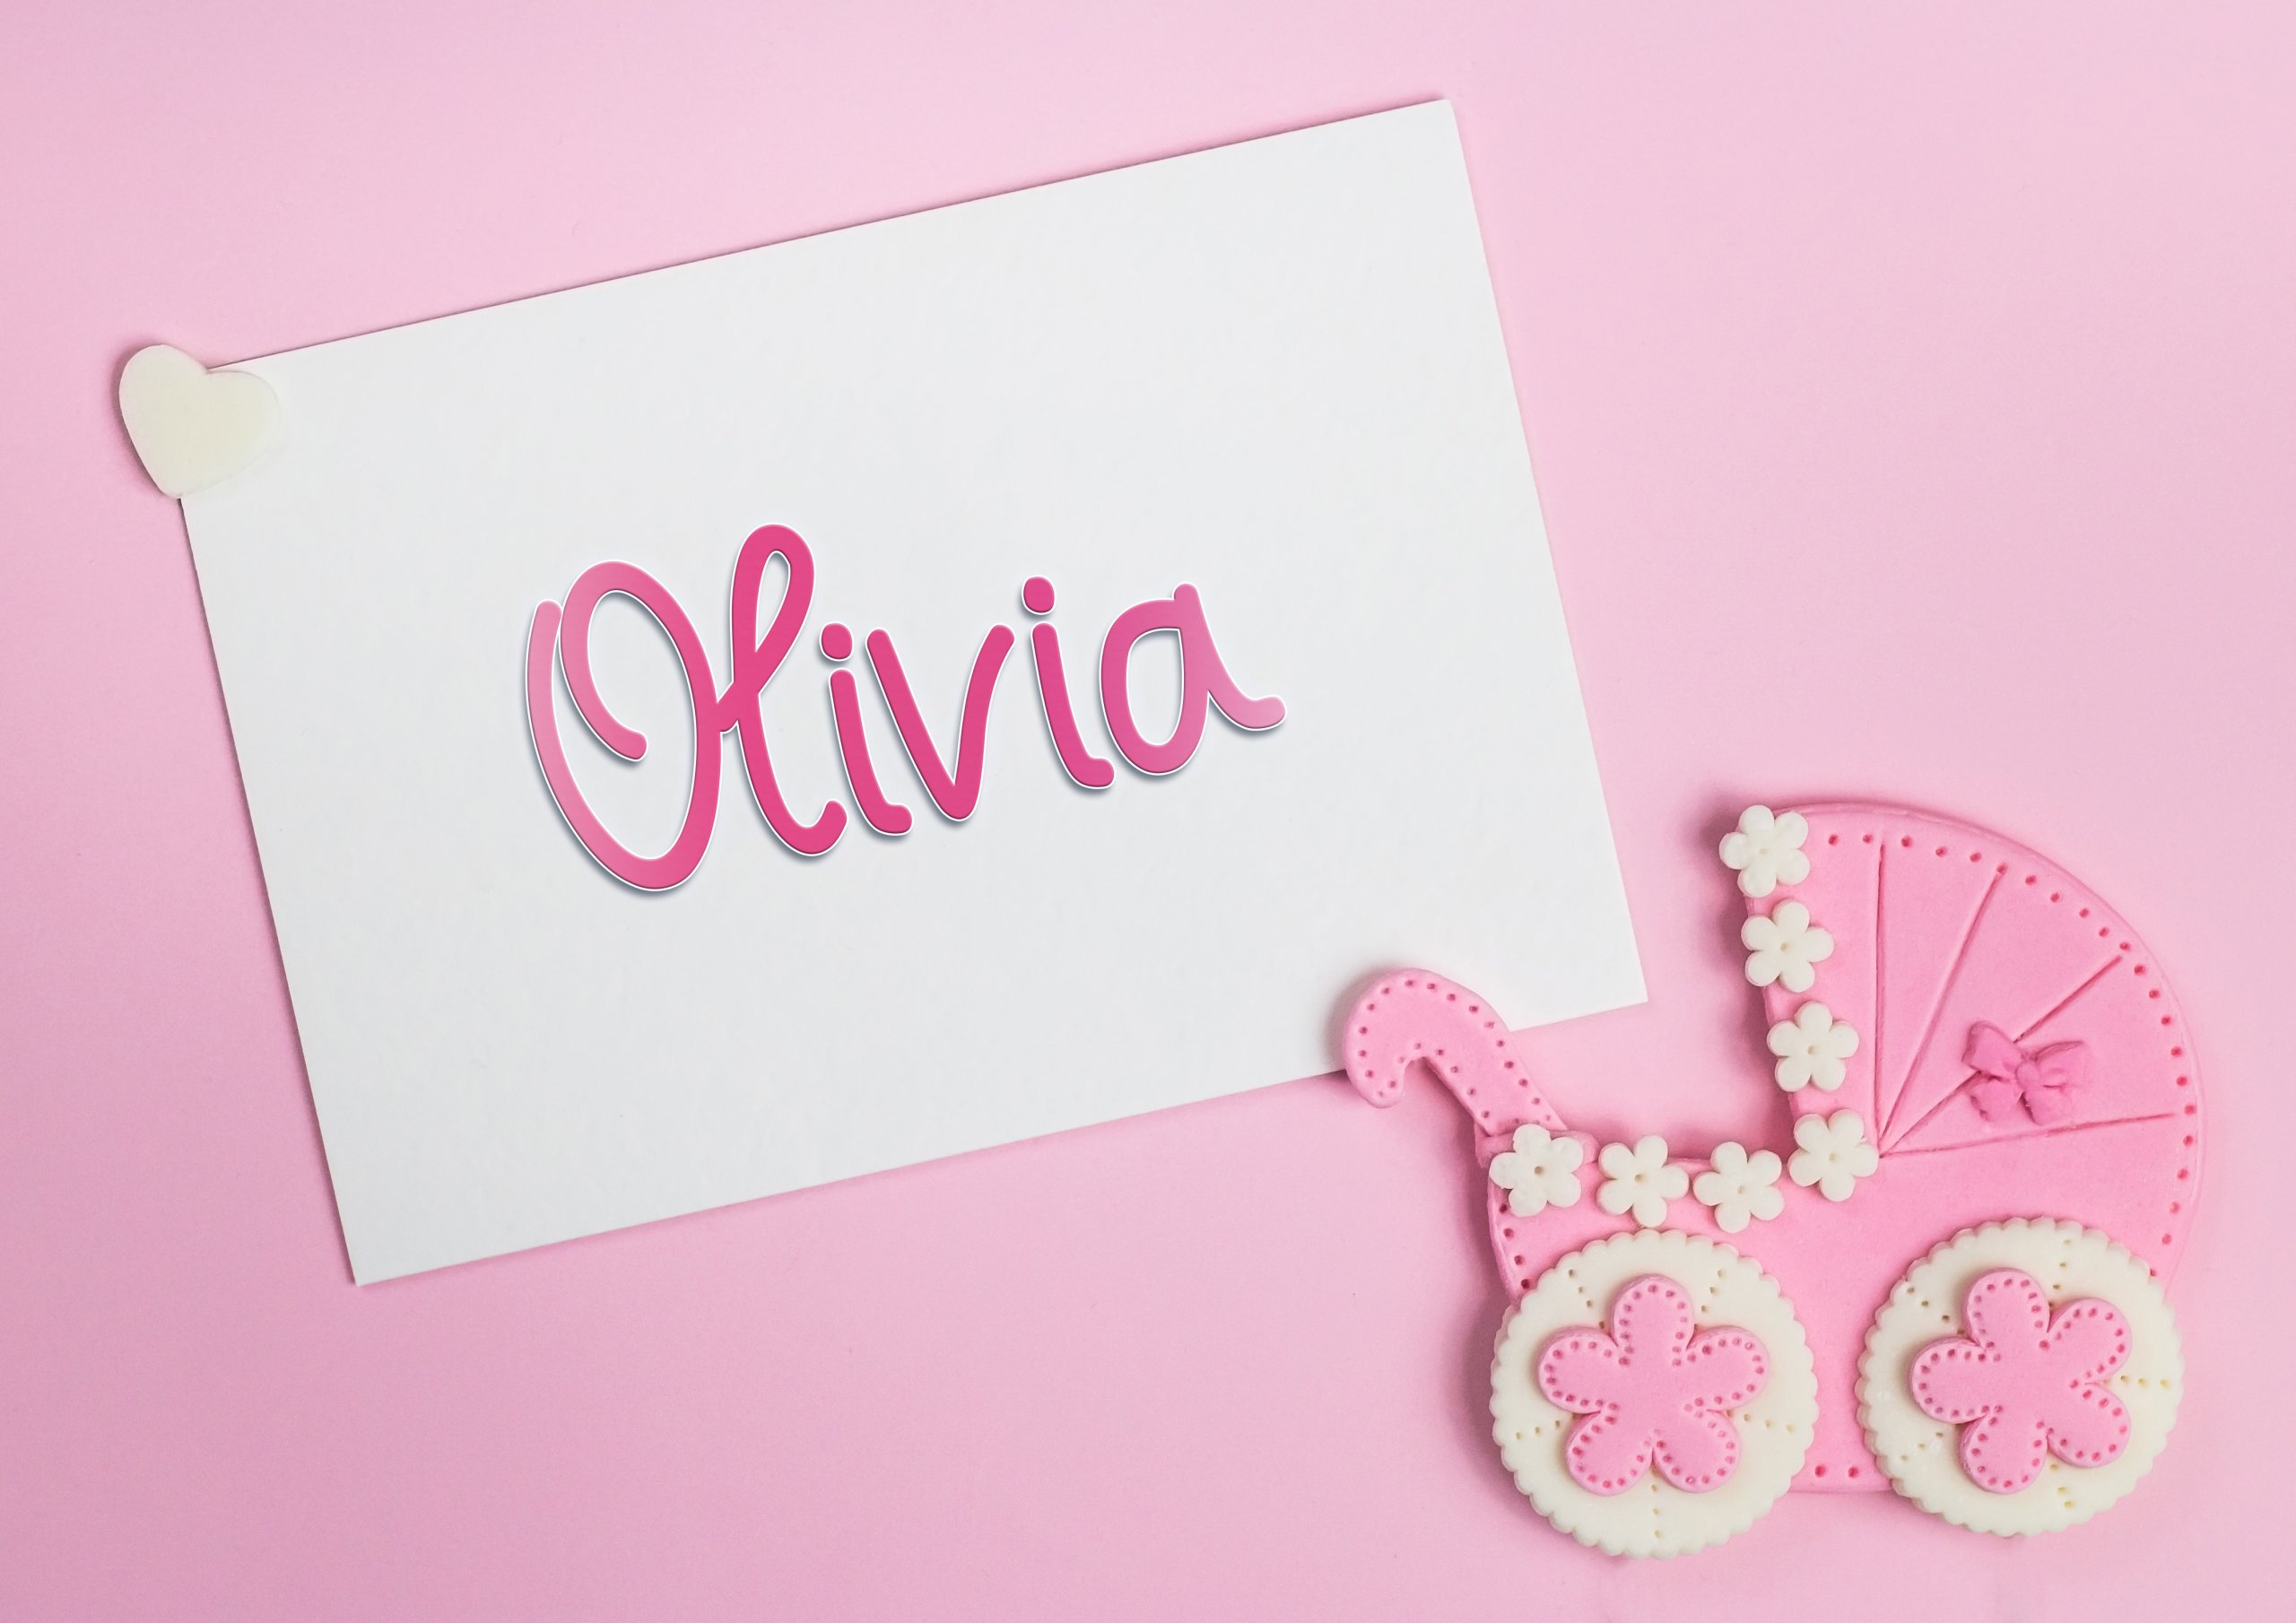 olivia meaning